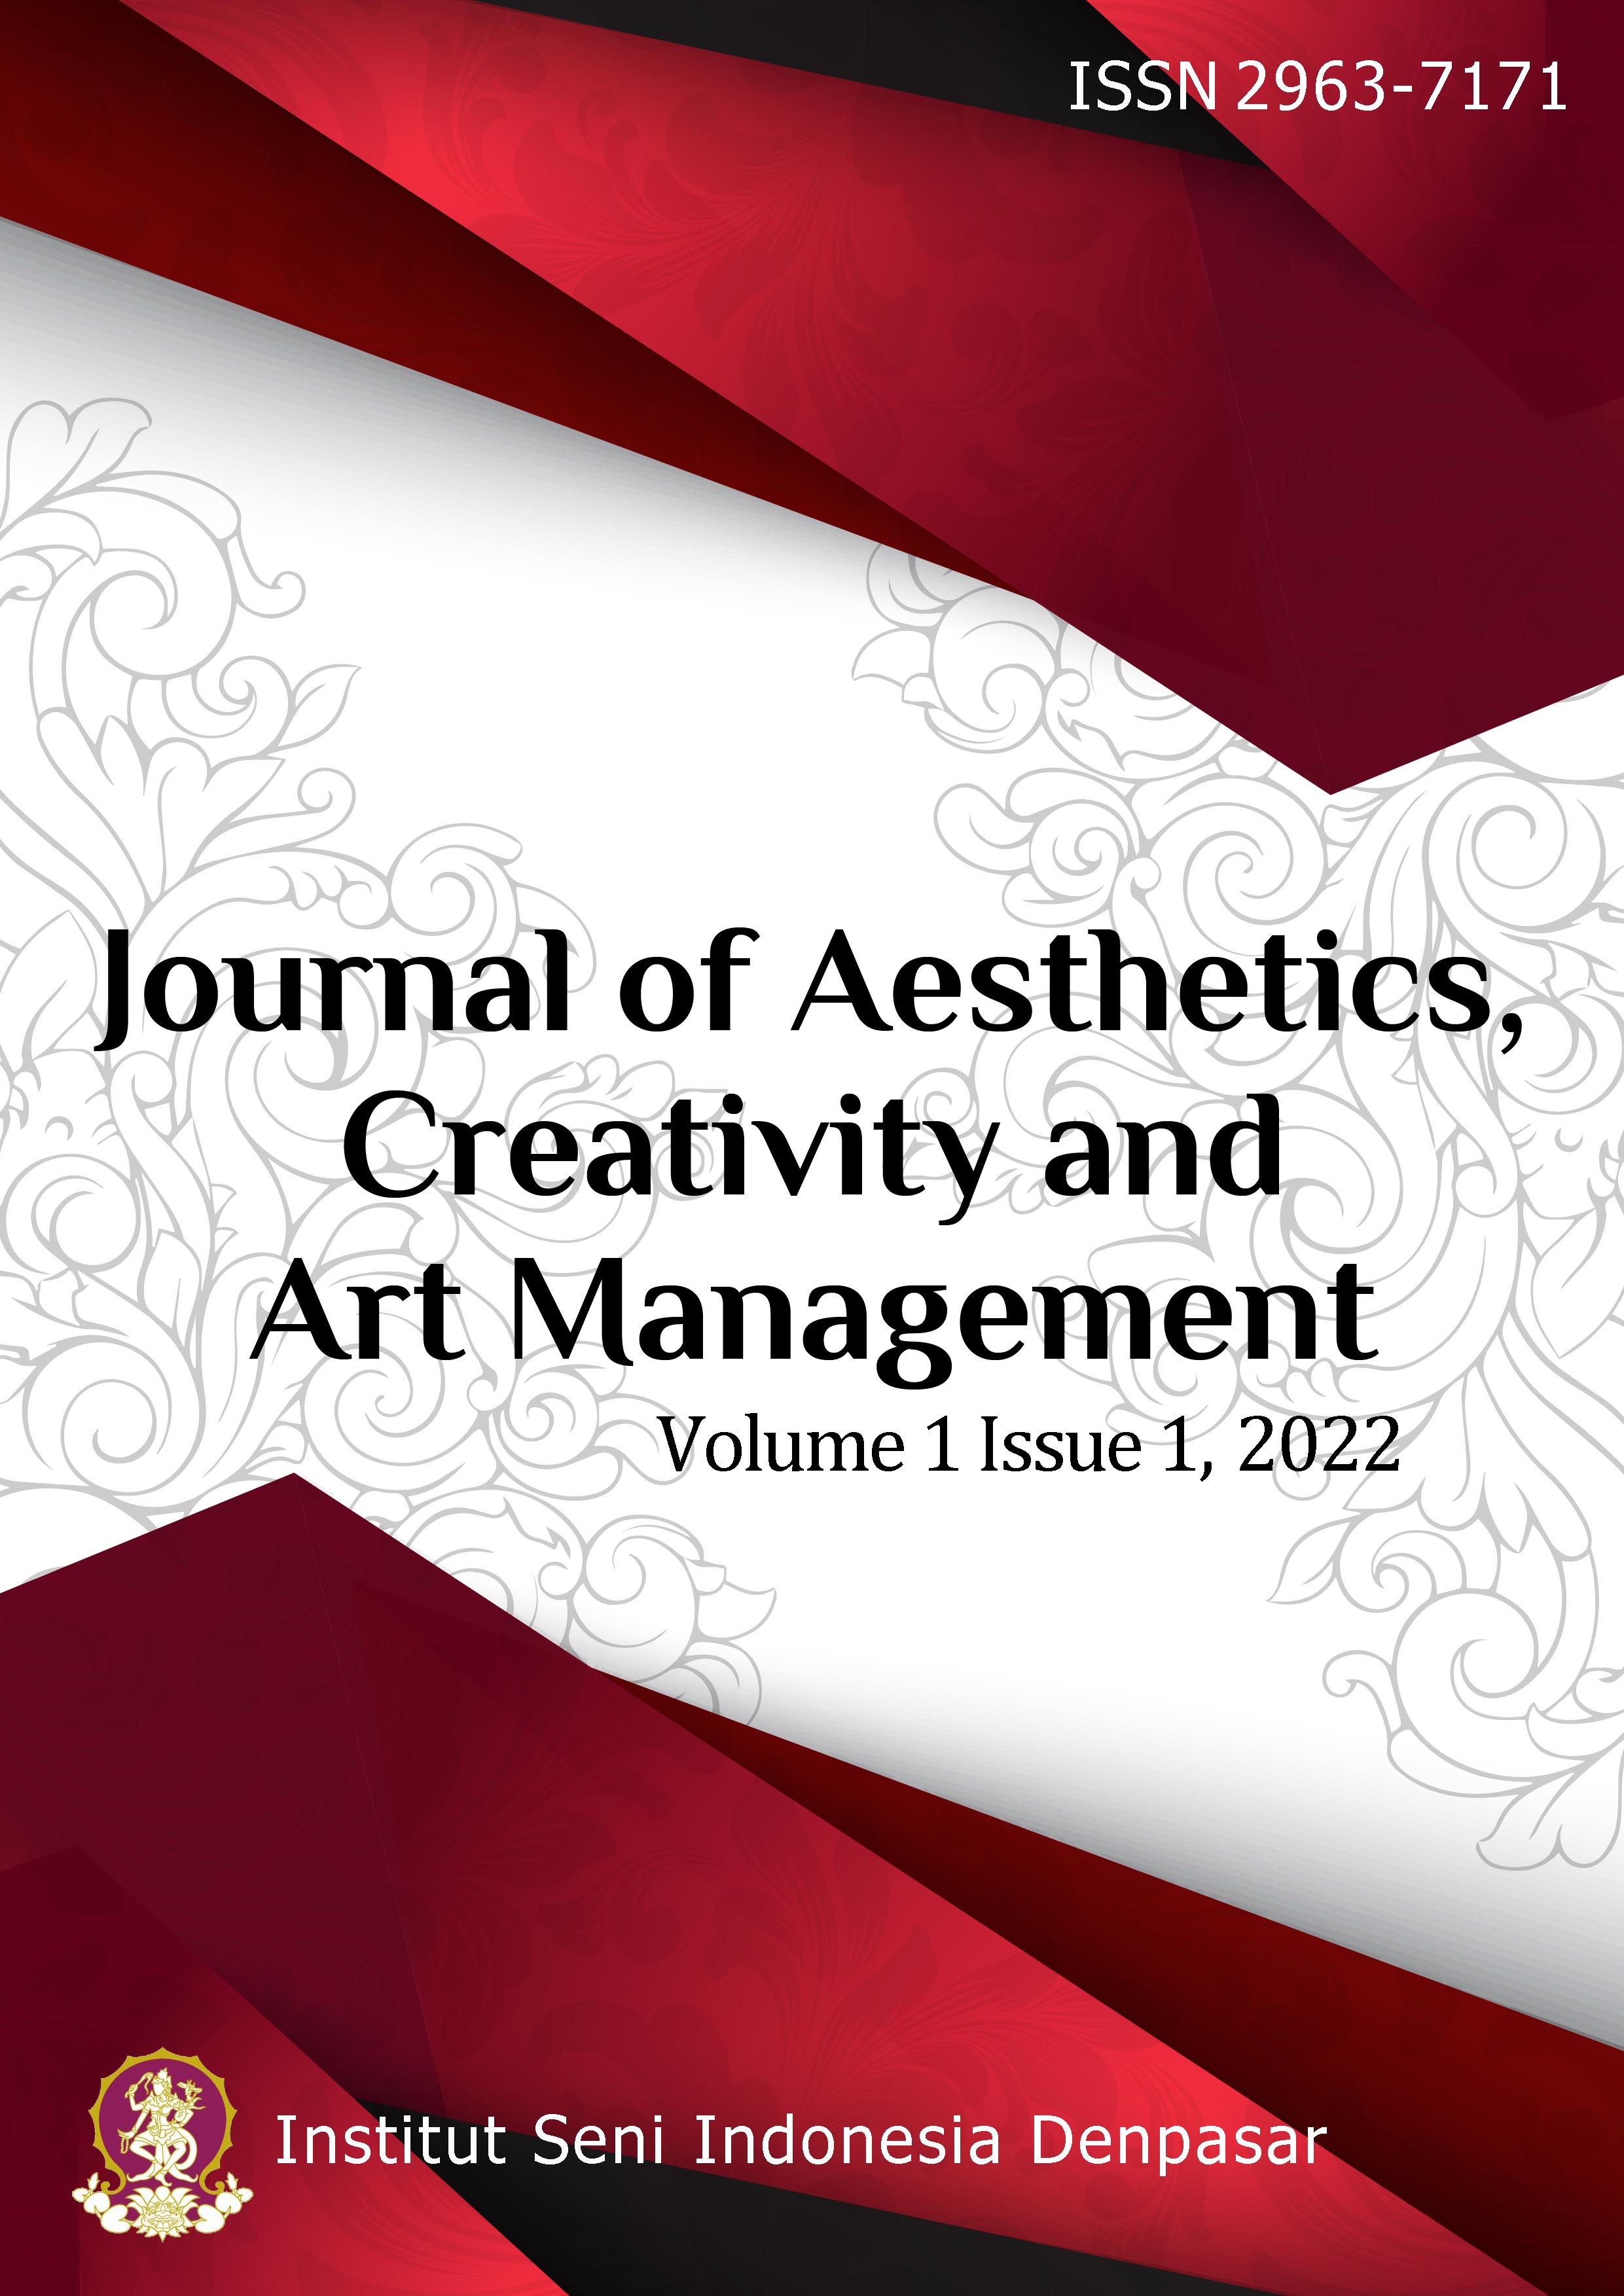 					View Vol. 1 No. 1 (2022): Journal of Aesthetics, Creativity and Art Management
				